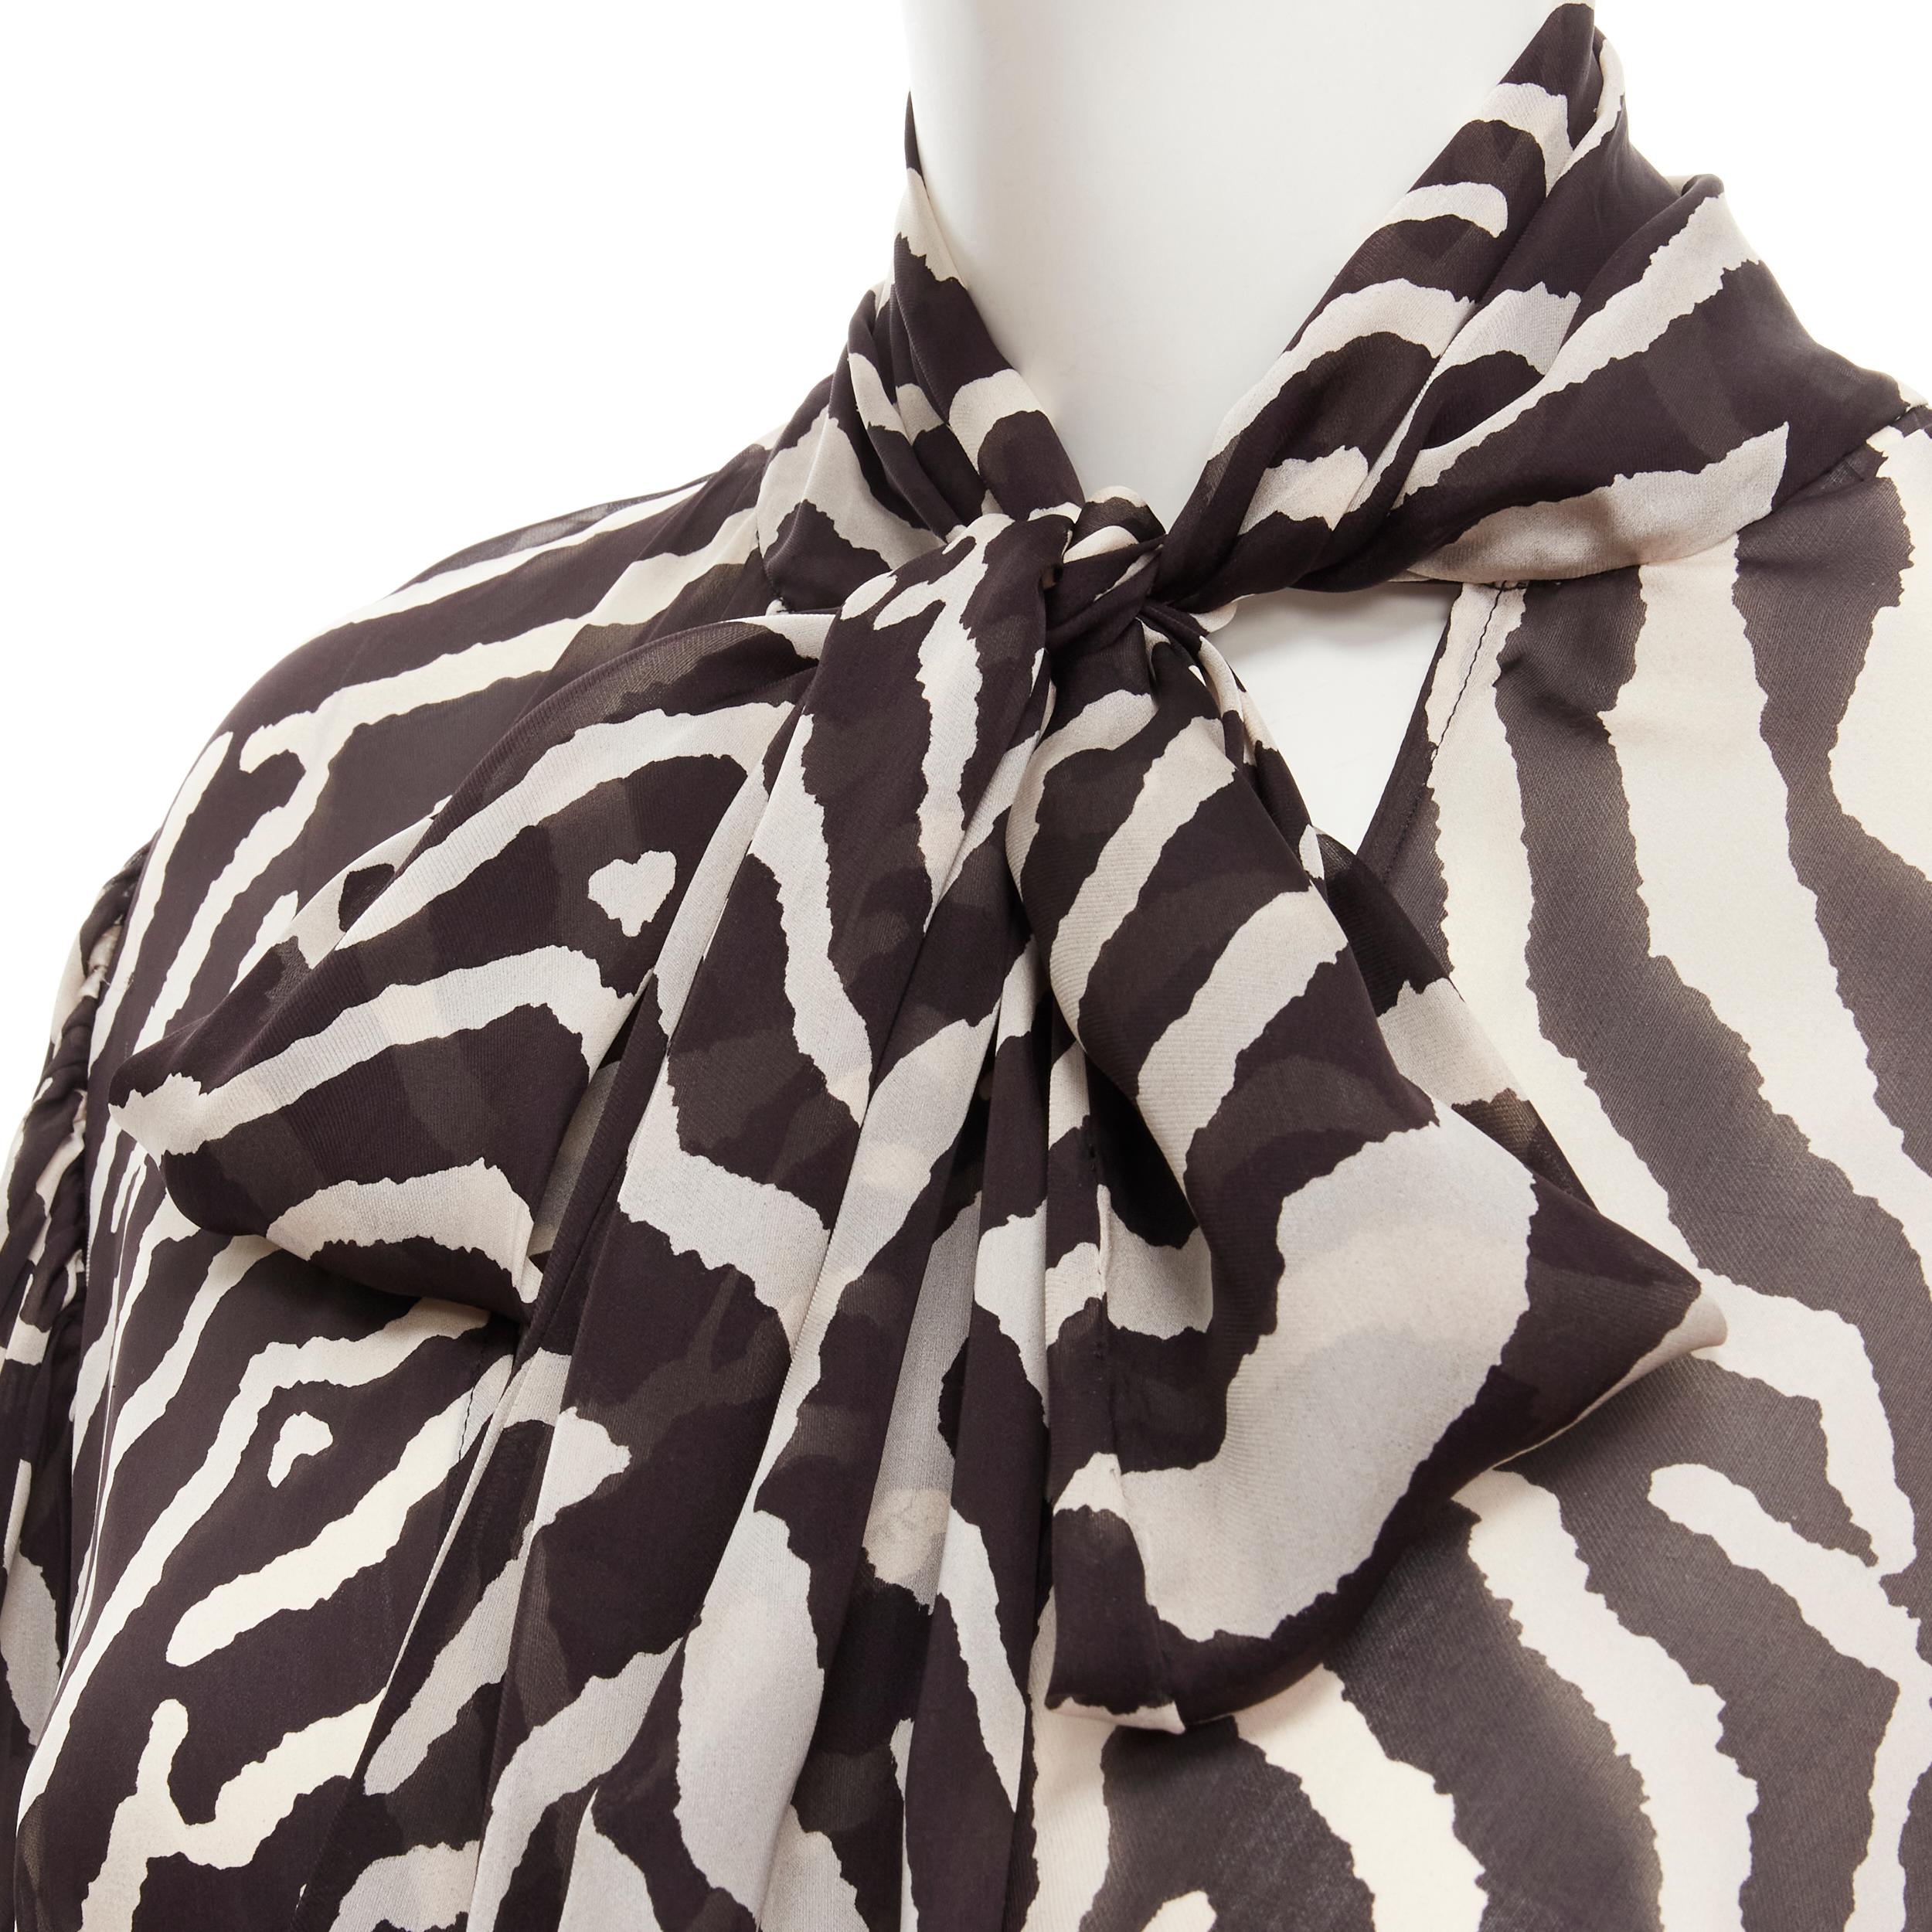 ROBERTO CAVALLI VIntage brown zebra striped print pussy bow silk blouse IT44 M 
Reference: GIYG/A00207 
Brand: Roberto Cavalli 
Material: Silk 
Color: Black 
Pattern: Zebra 
Closure: Button 
Extra Detail: Elasticated belt at inside to create a